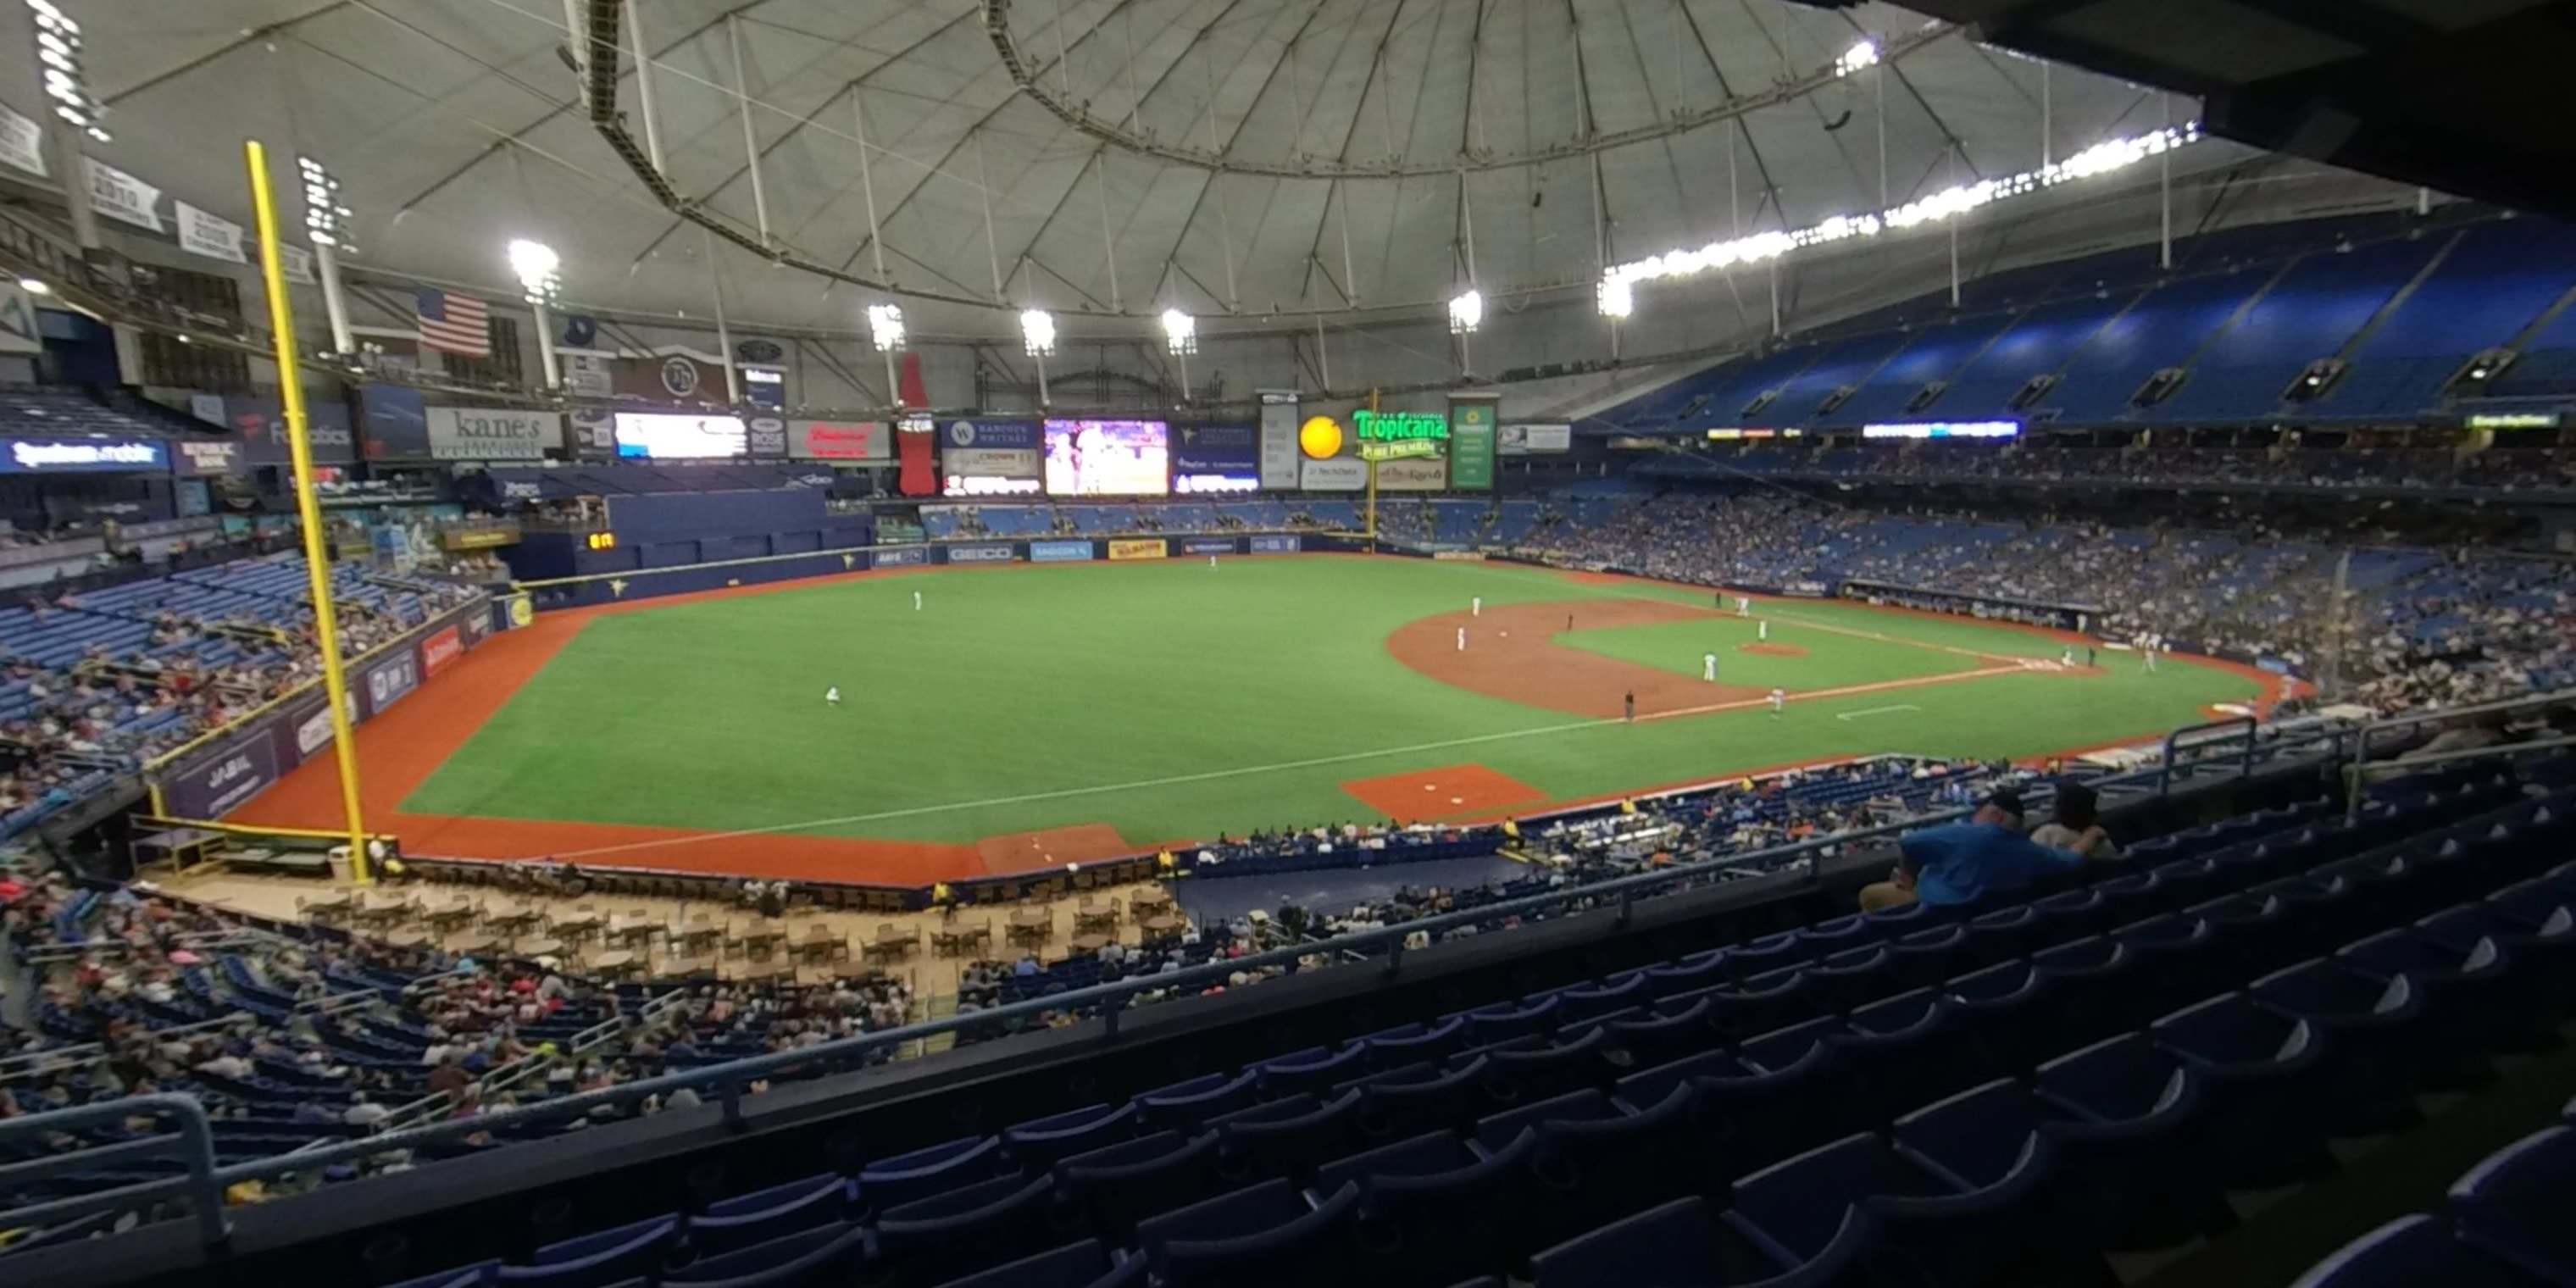 section 221 panoramic seat view  for baseball - tropicana field